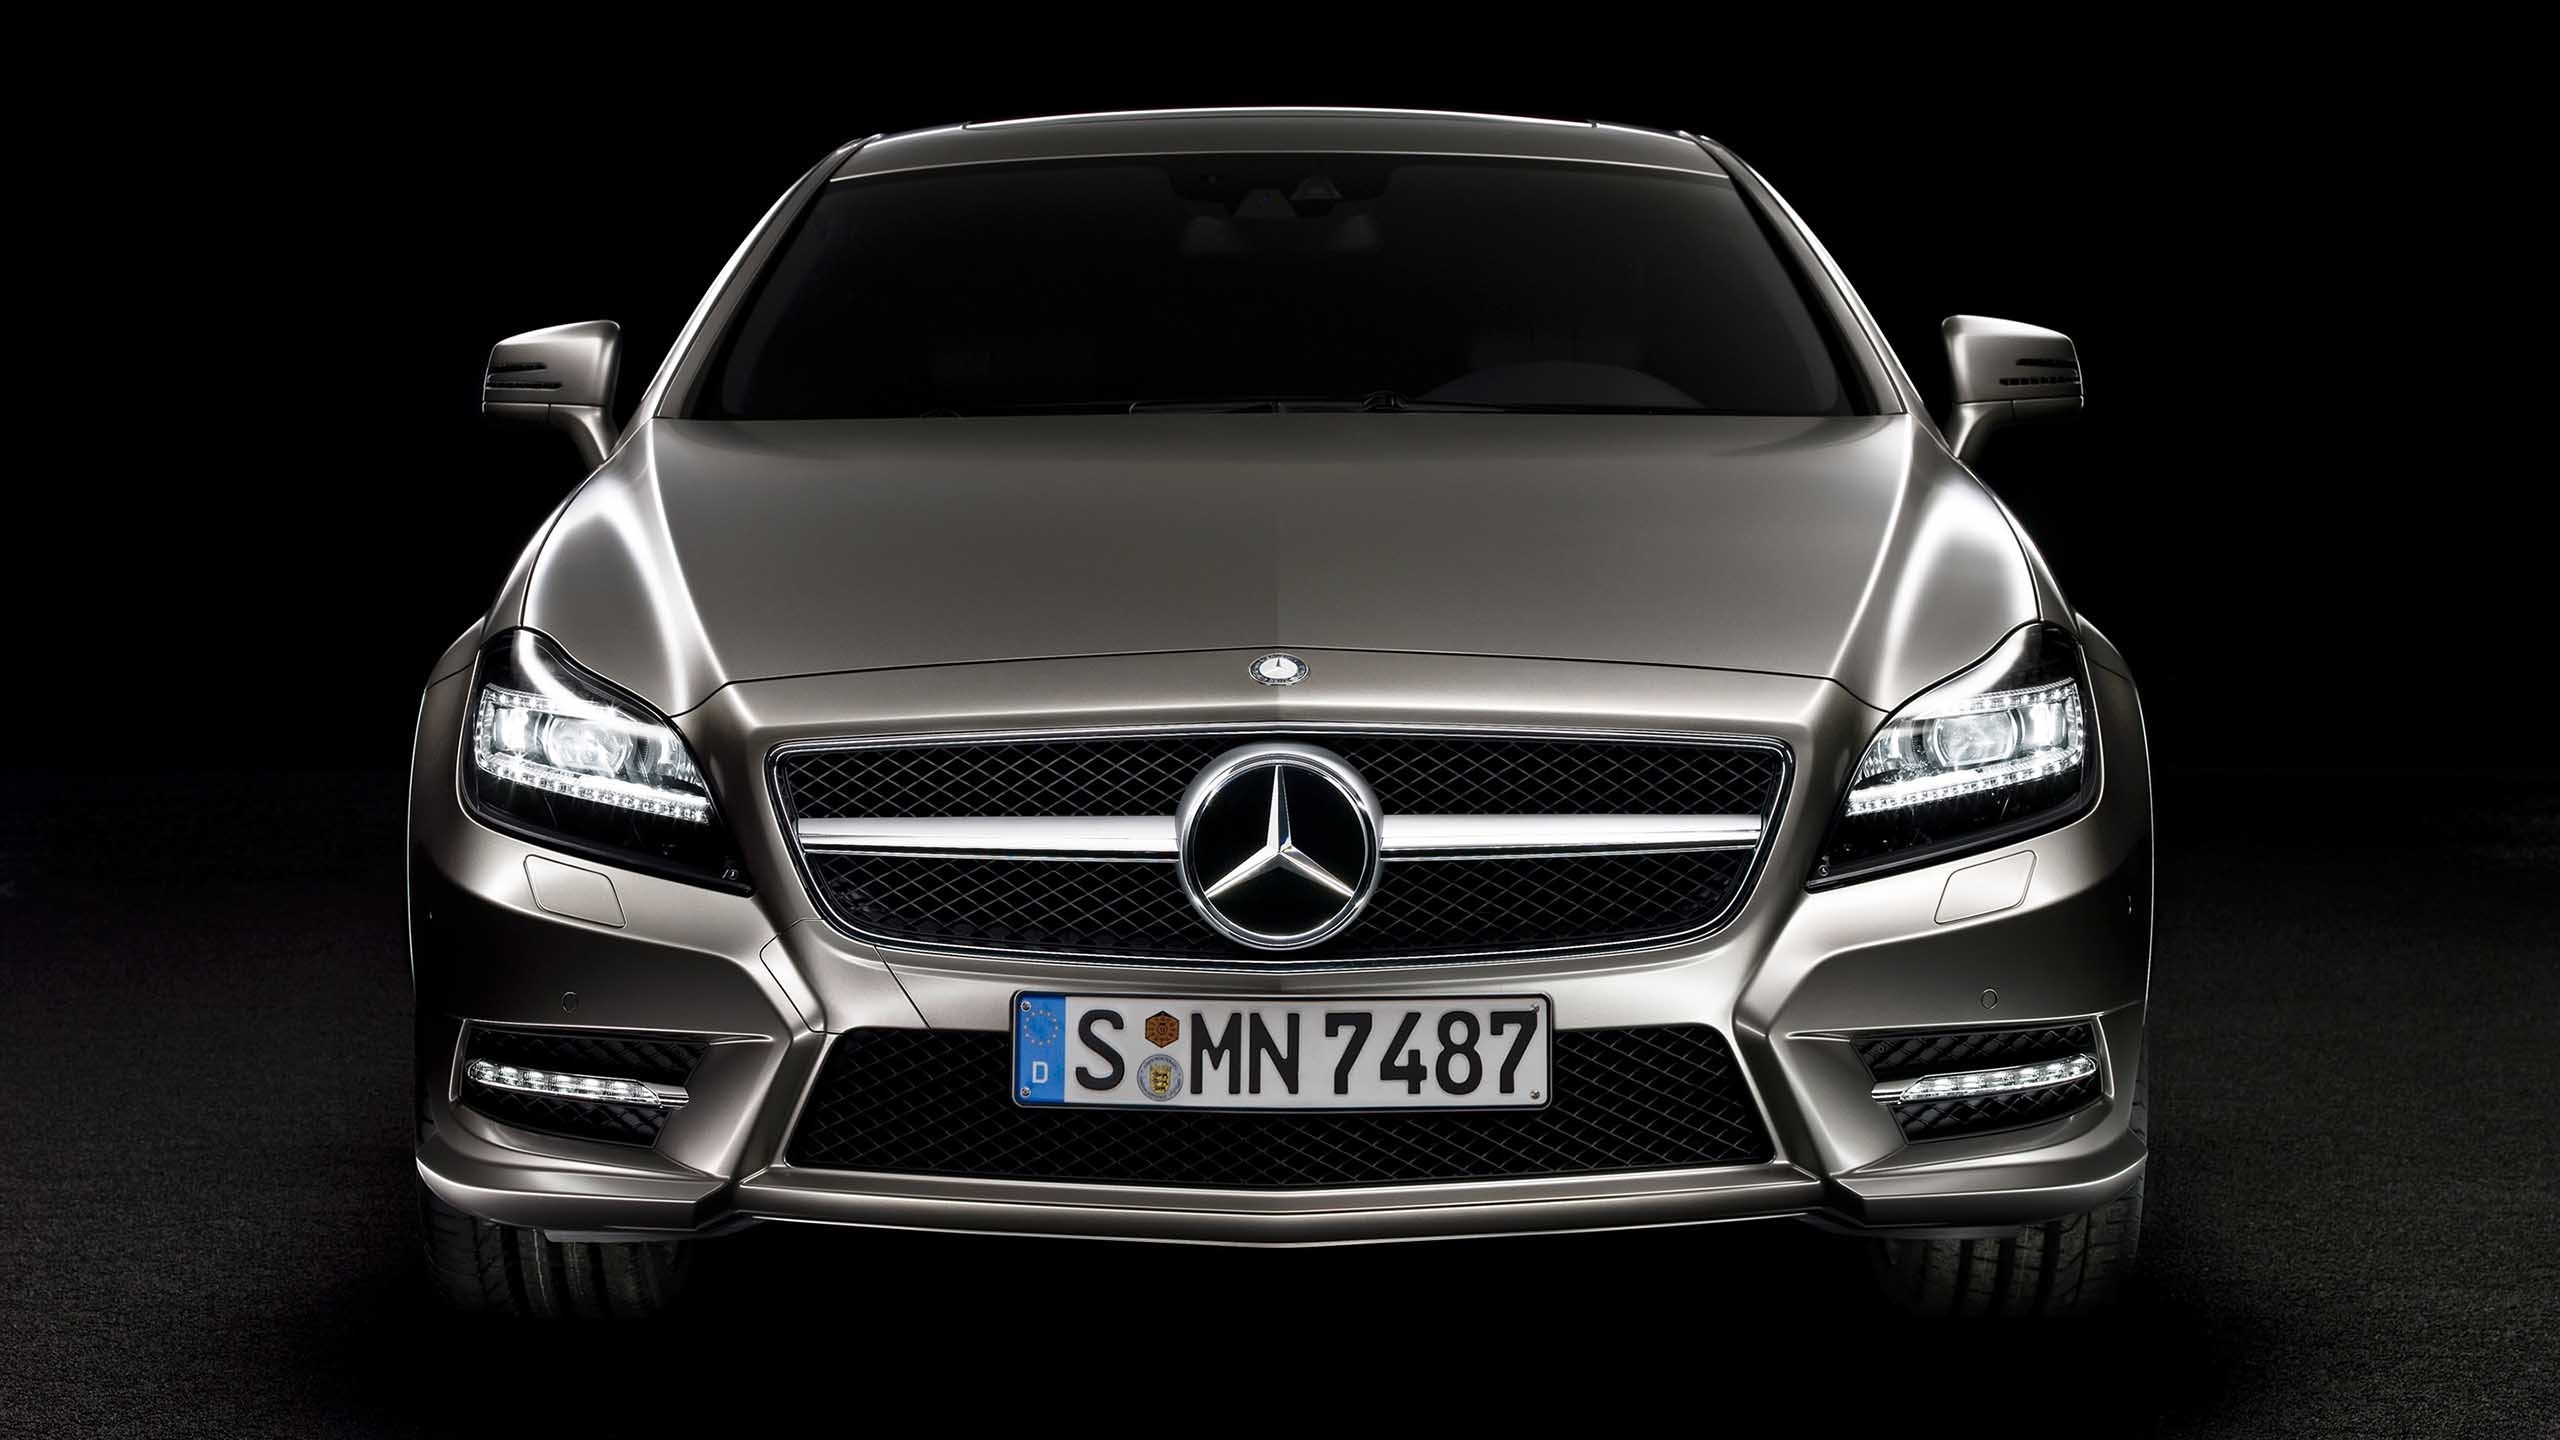 2012 Mercedes Benz CLS Front for 2560x1440 HDTV resolution